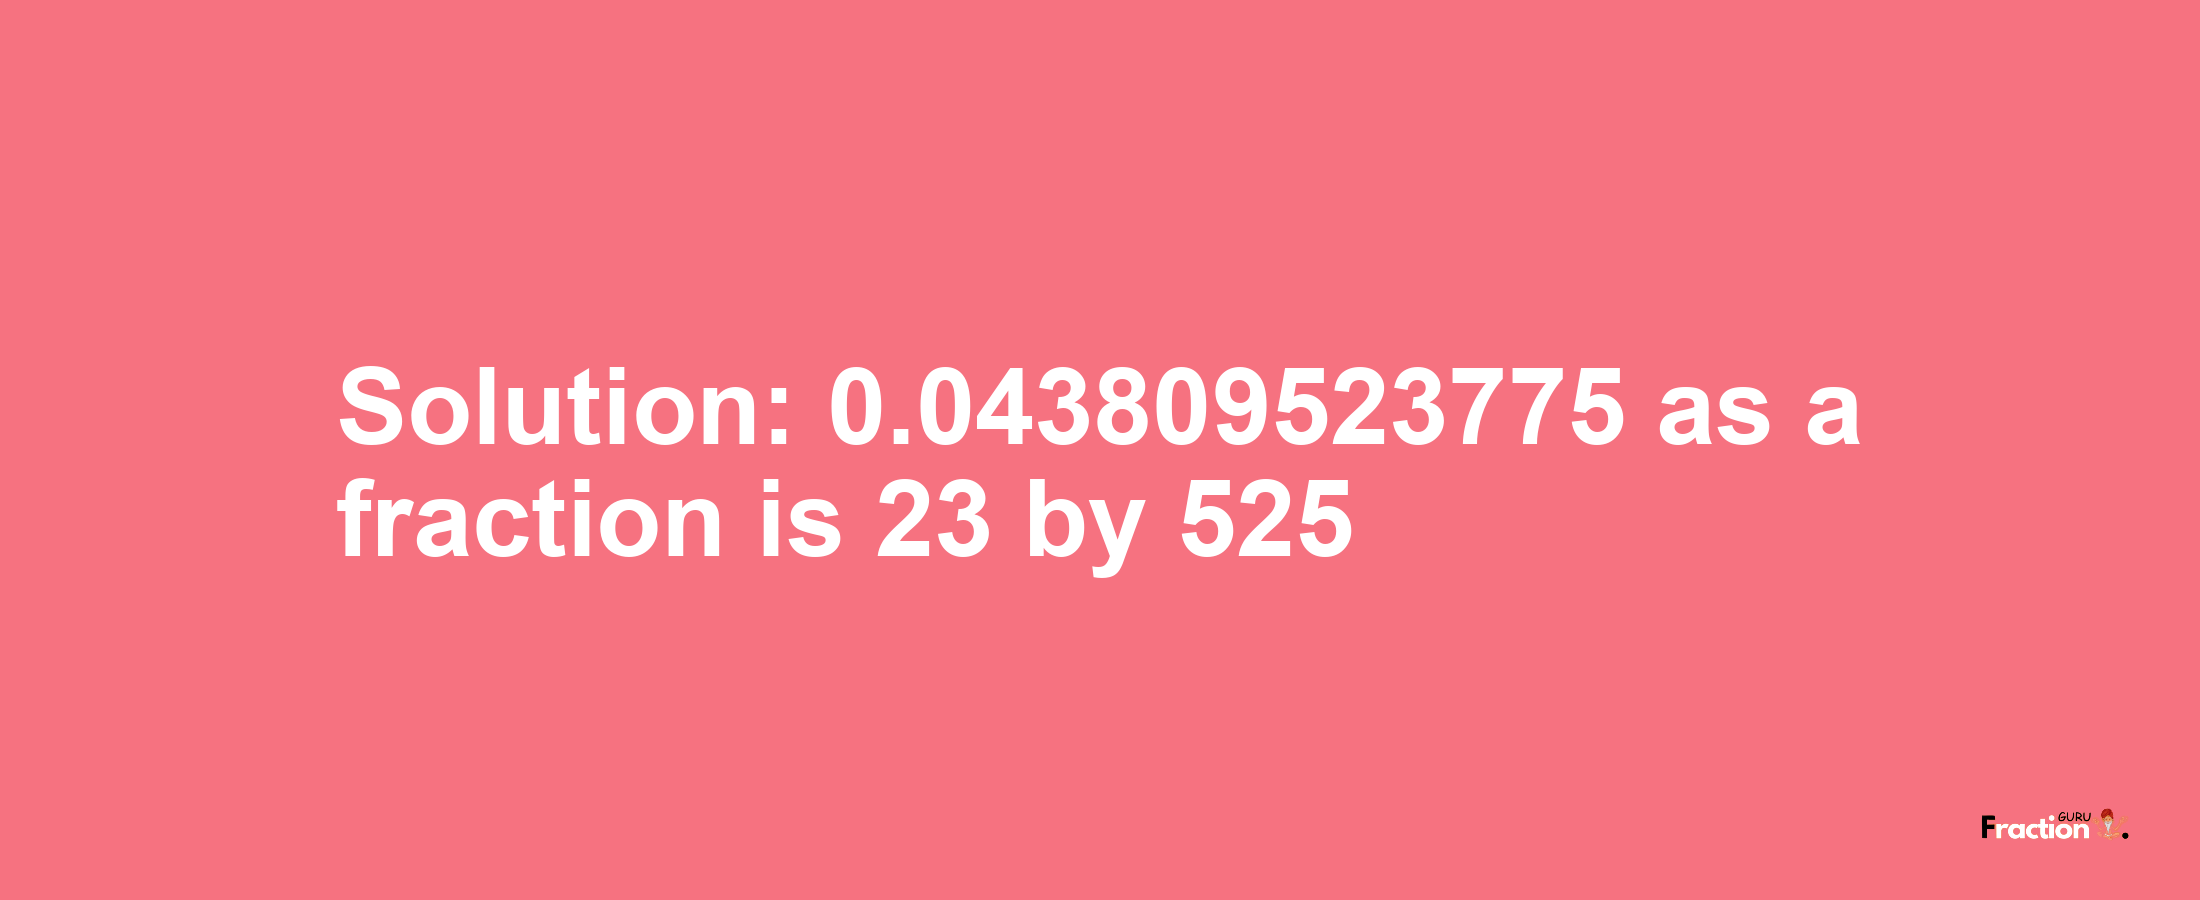 Solution:0.043809523775 as a fraction is 23/525